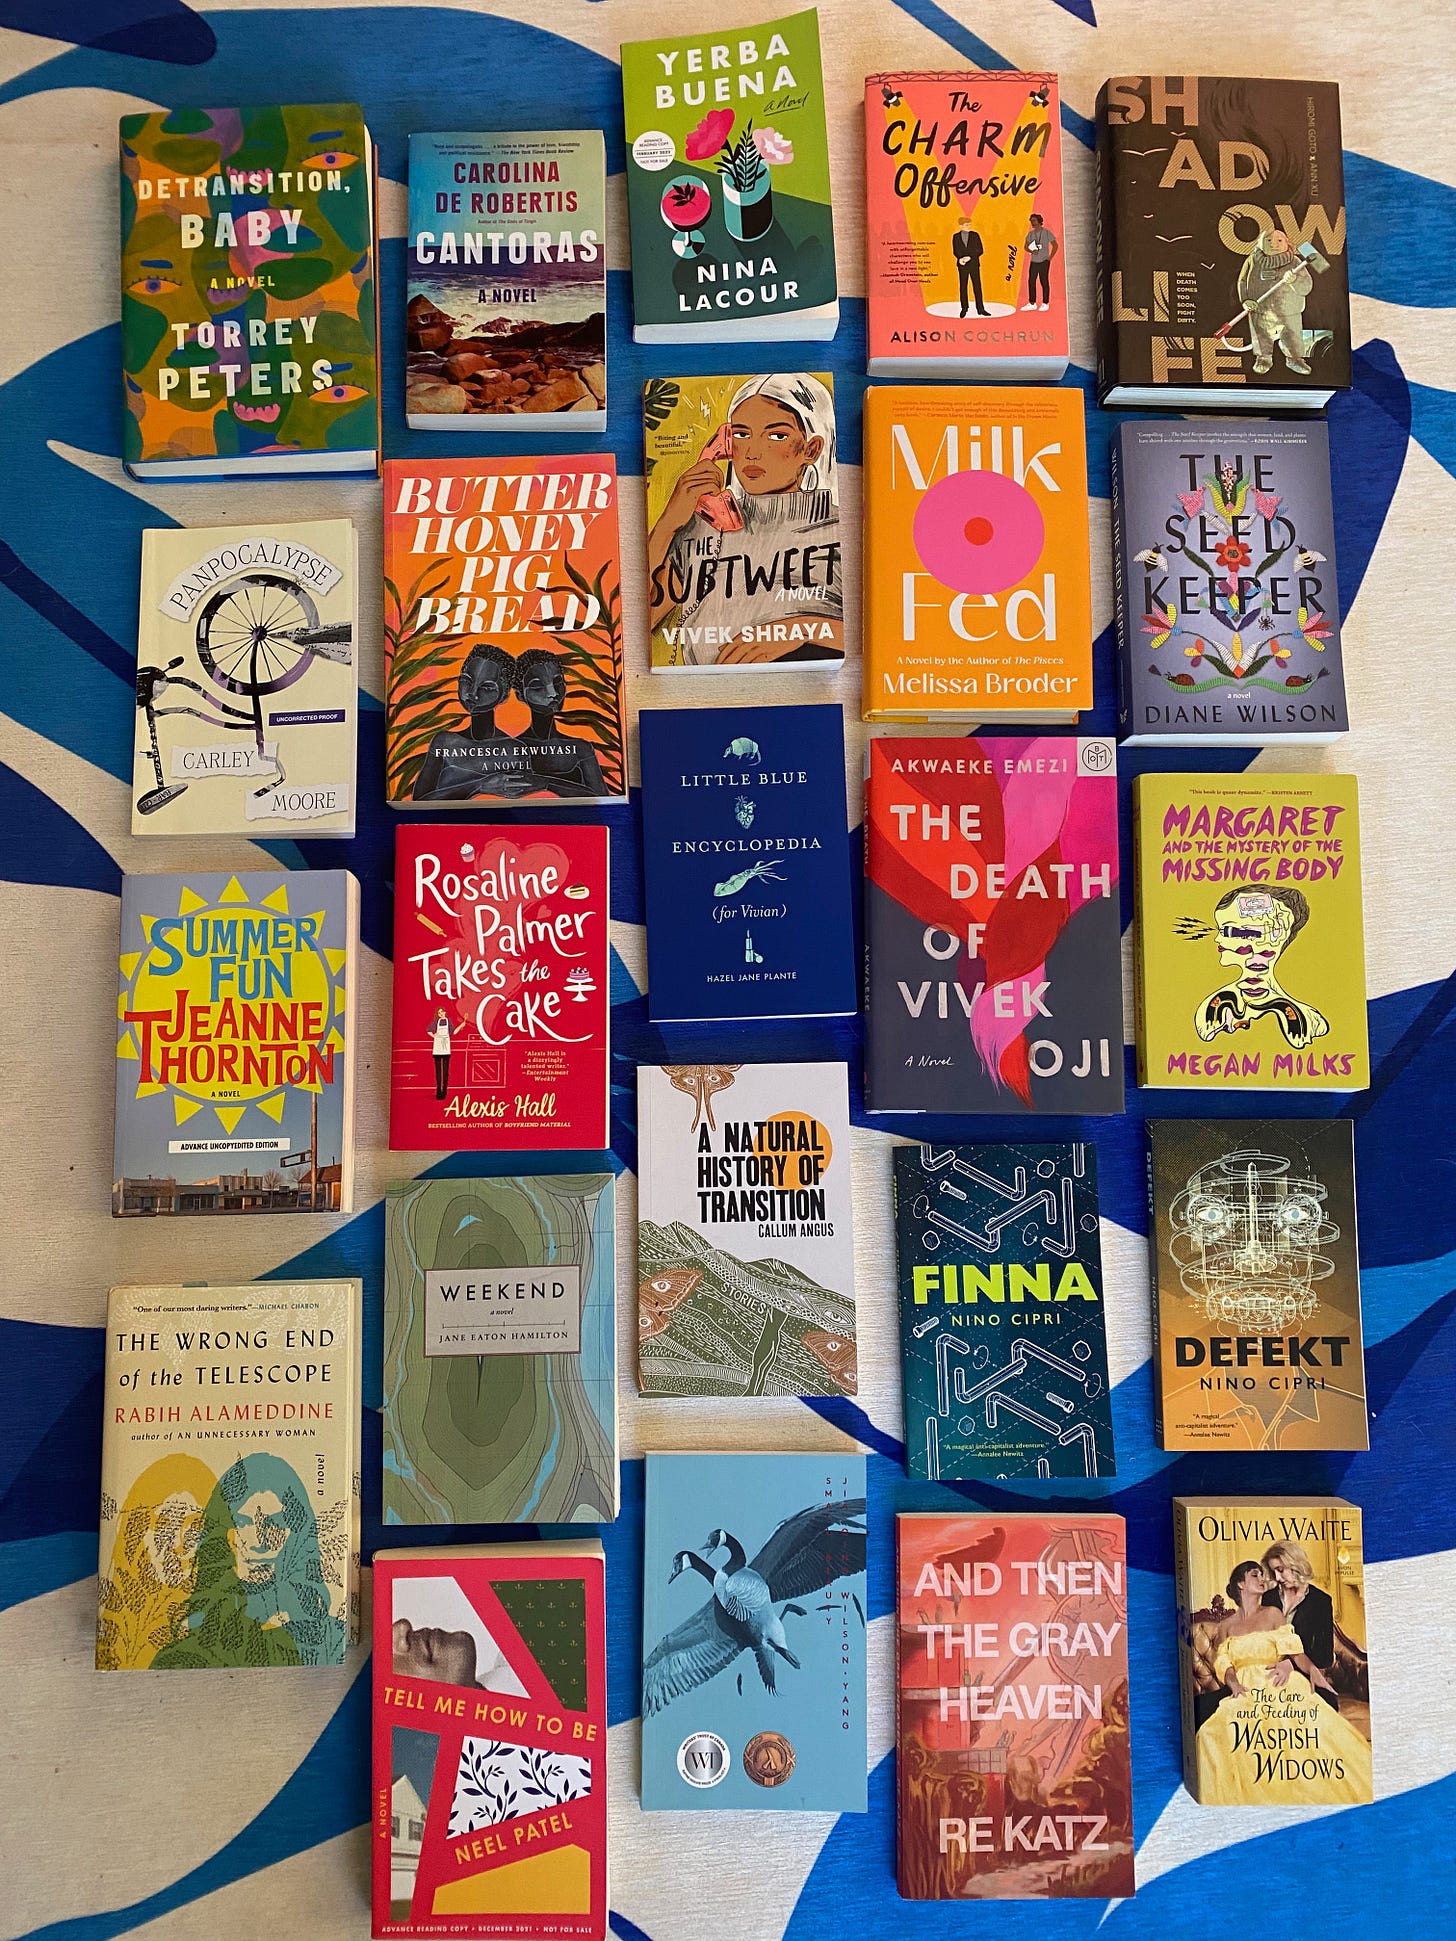 A selection of the books mentioned below, laid out on a blue and white patterned rug.